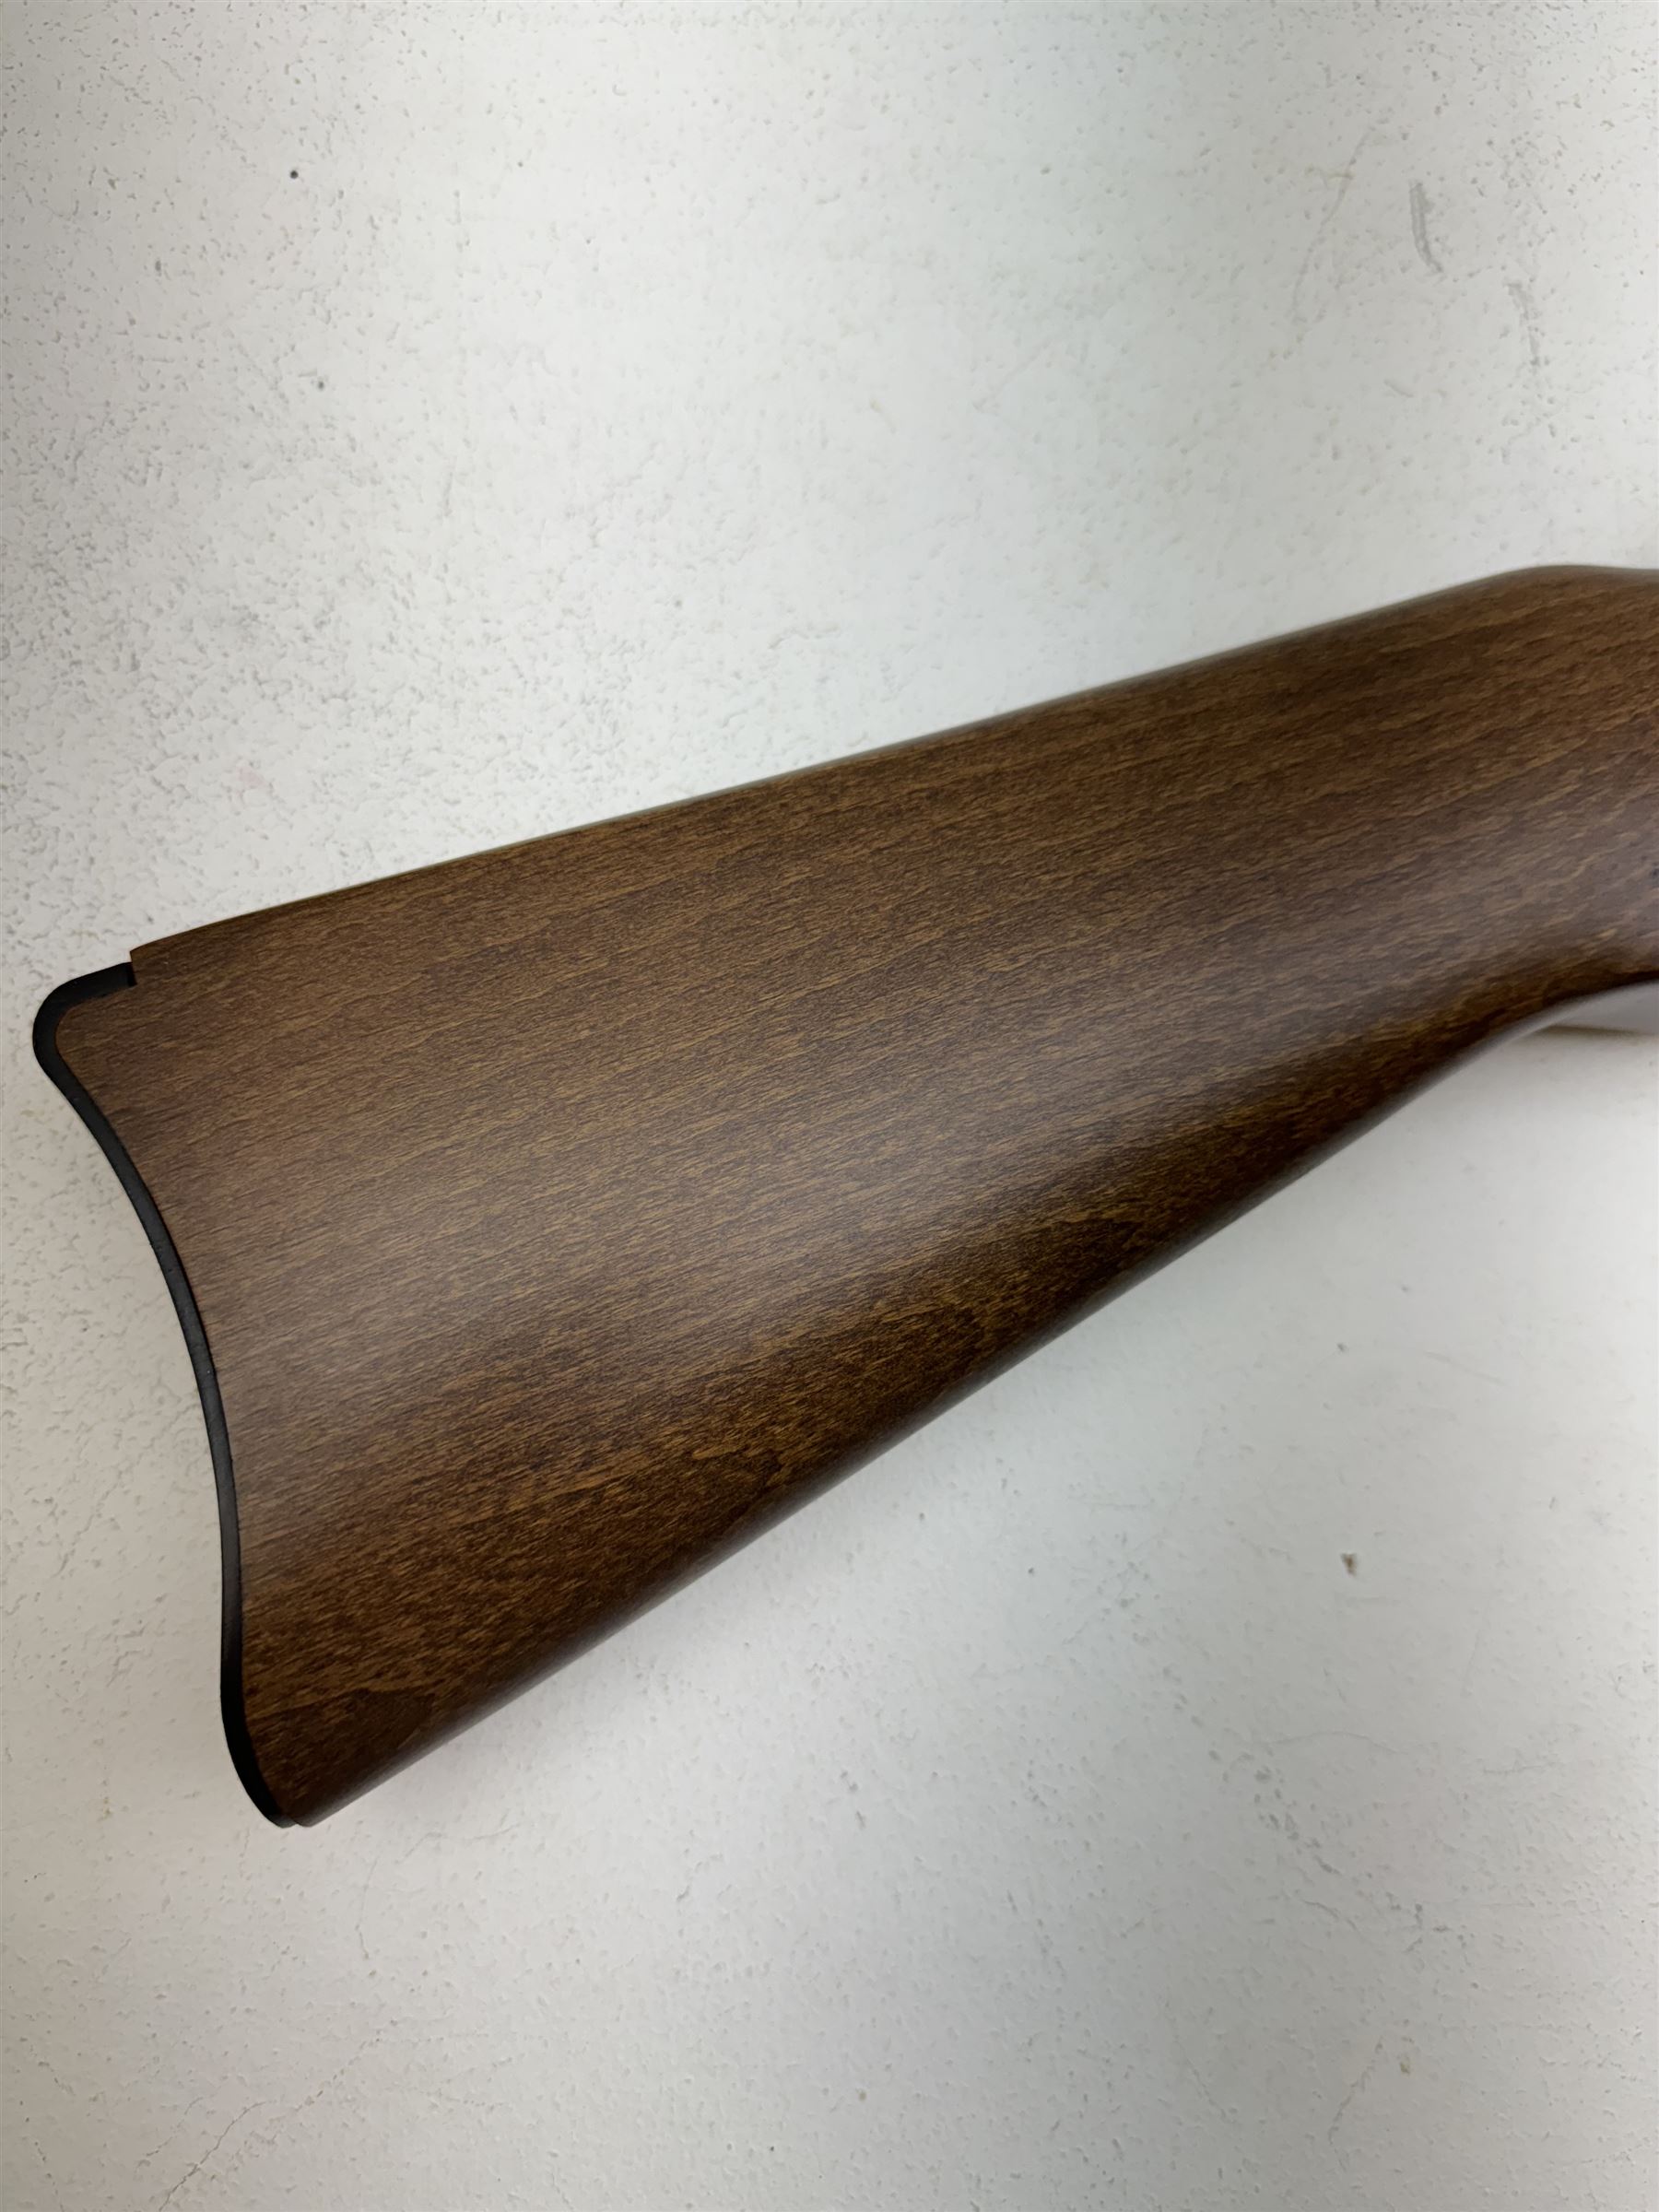 SECTION 1 FIREARMS CERTIFICATE REQUIRED - Ruger model 10-22 .22lr semi auto rifle with 46cm (18") ba - Image 8 of 13